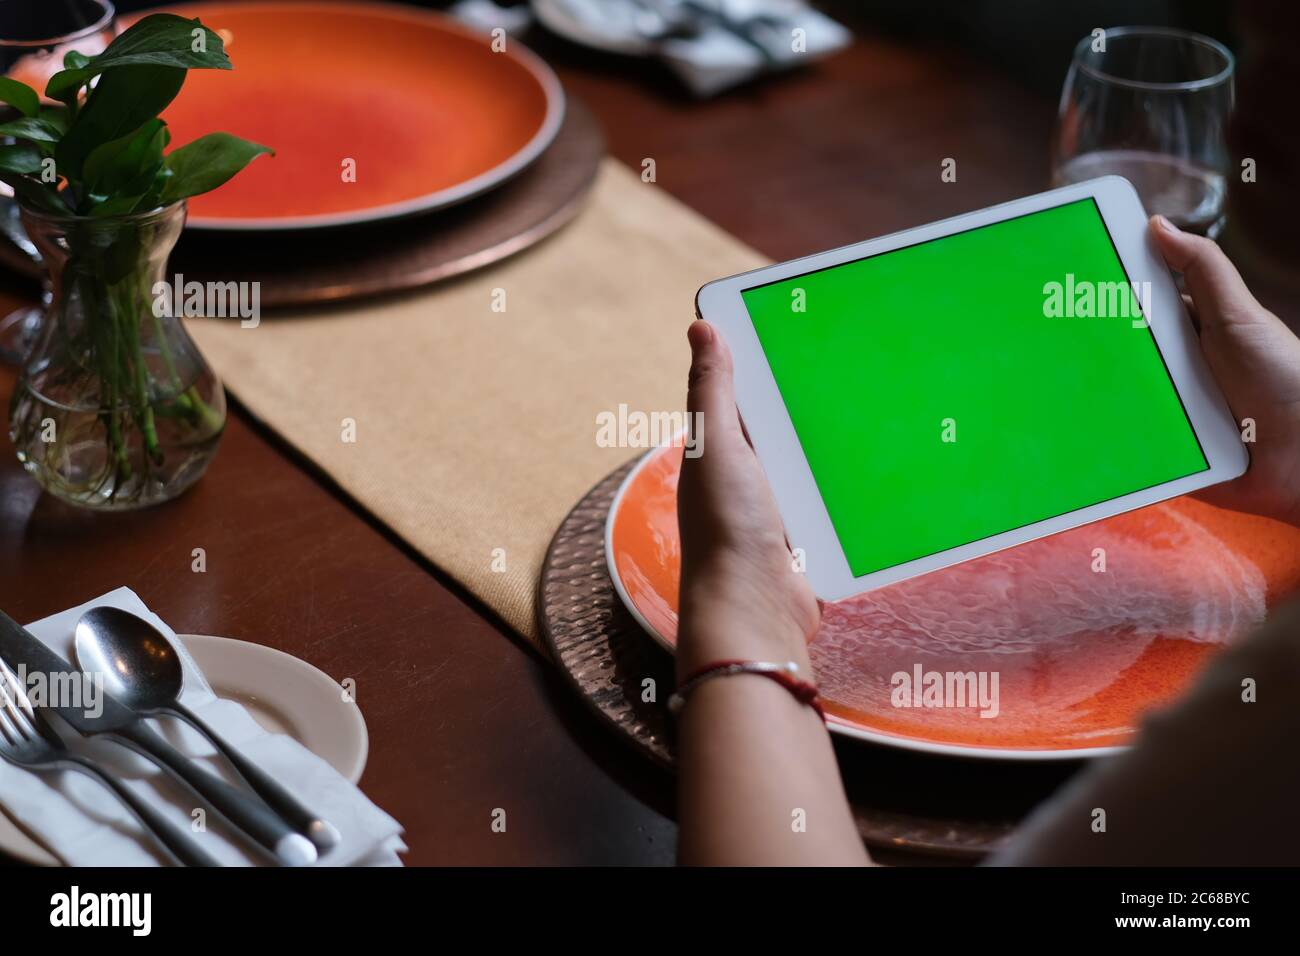 over shoulder of people using green screen tablet in restaurant. blurred plates on dining table. Stock Photo